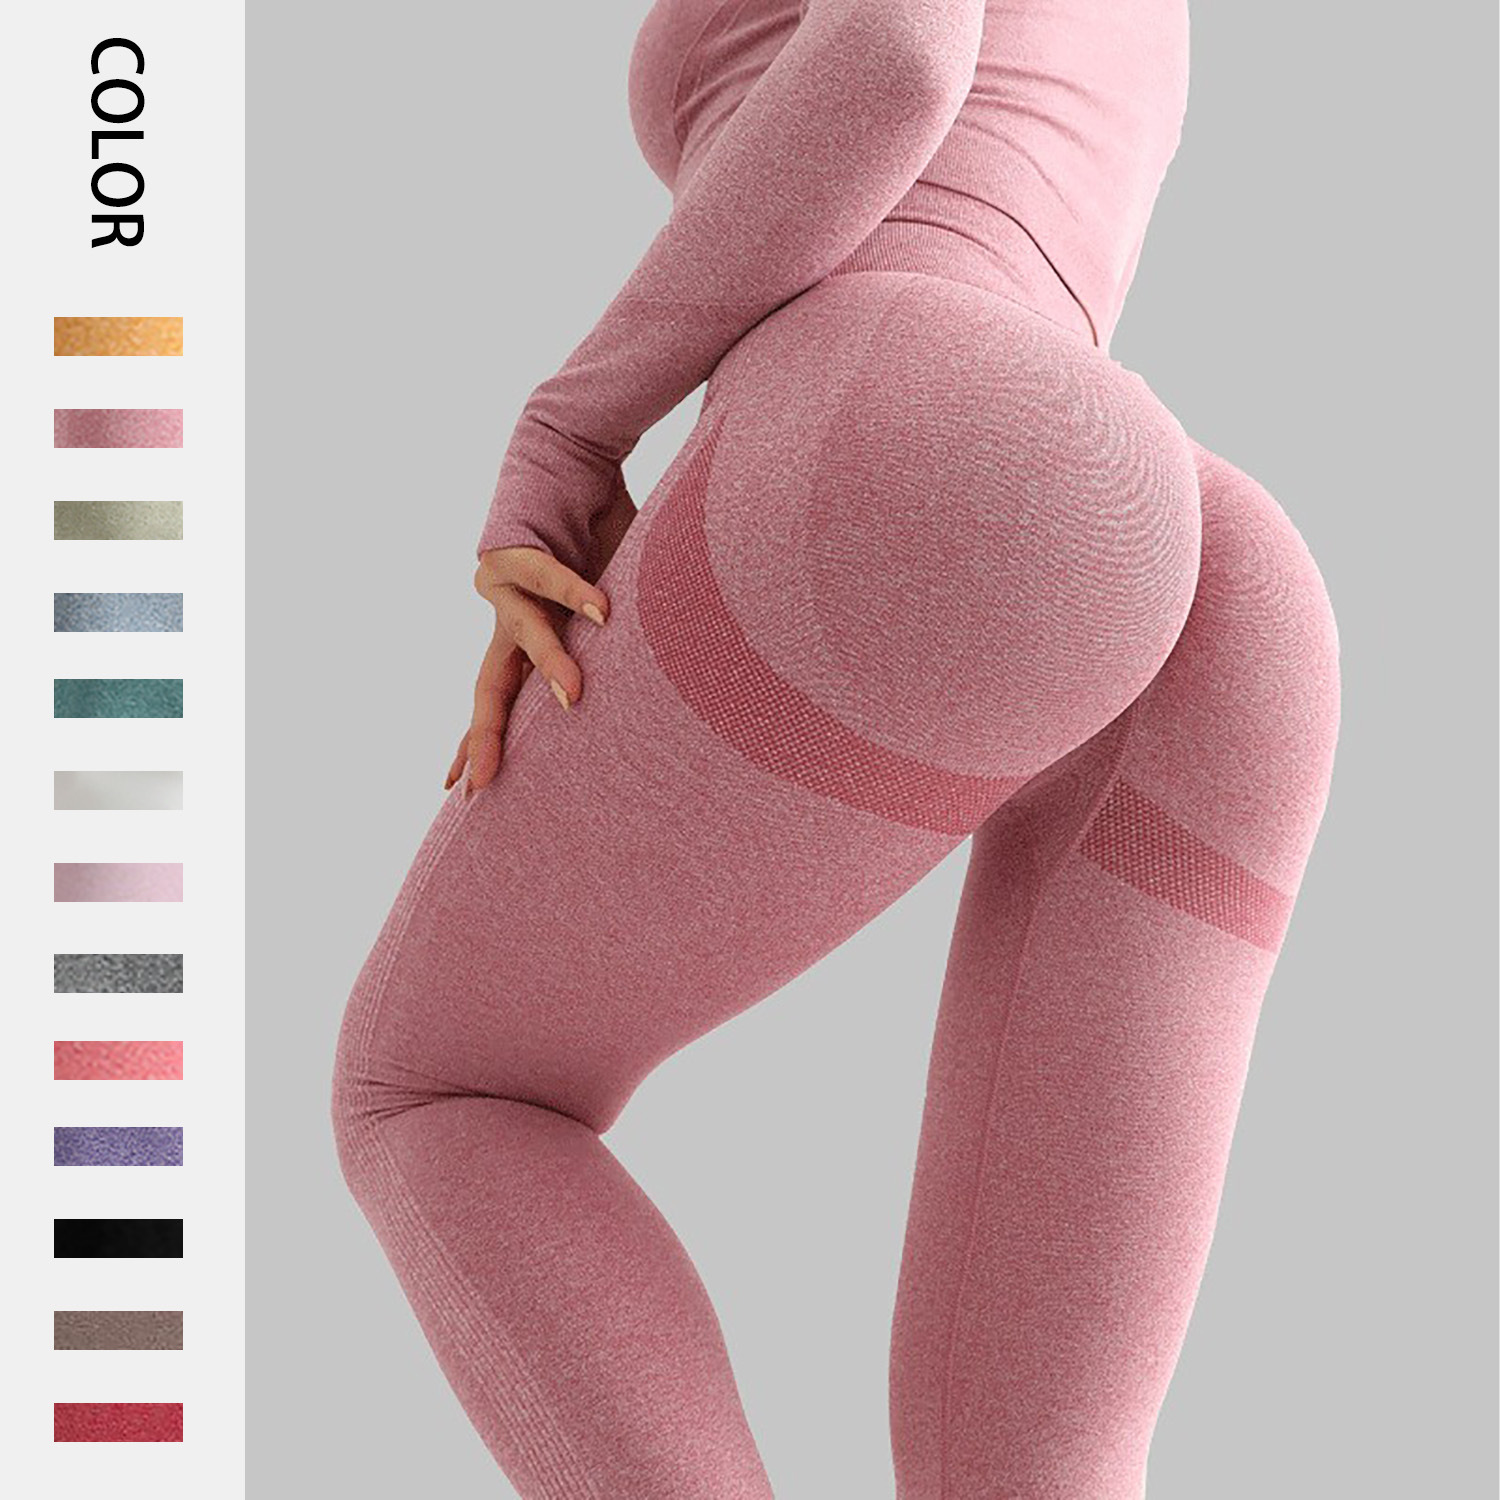 Peach Internet Celebrity European and American Seamless Yoga Pants Hip Breathable Yoga Clothes Tight High Waist Sports Workout Bottoms Women